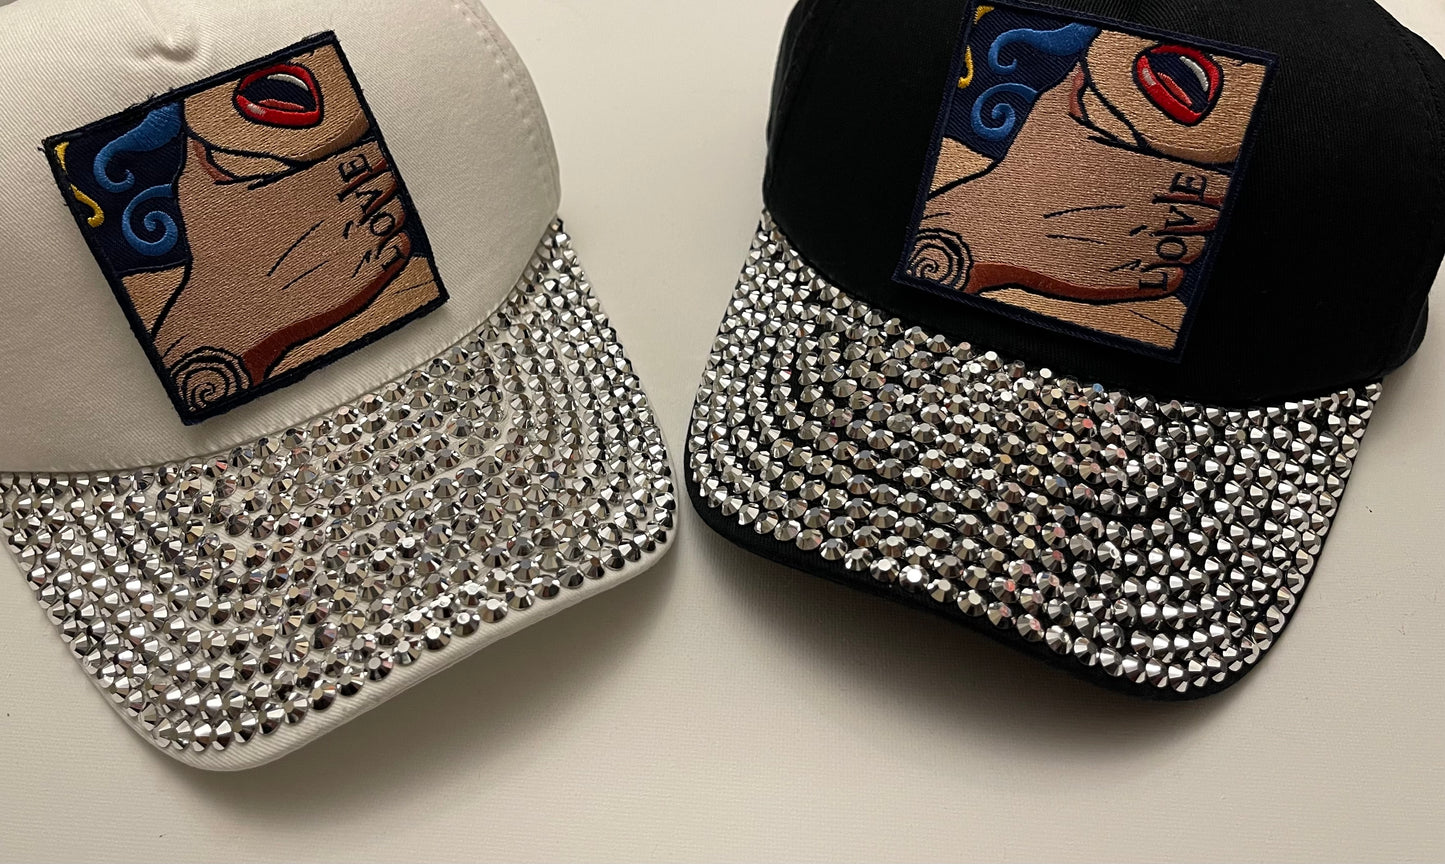 “Limited Edition” Custom-made Bedazzled LOVE Hats